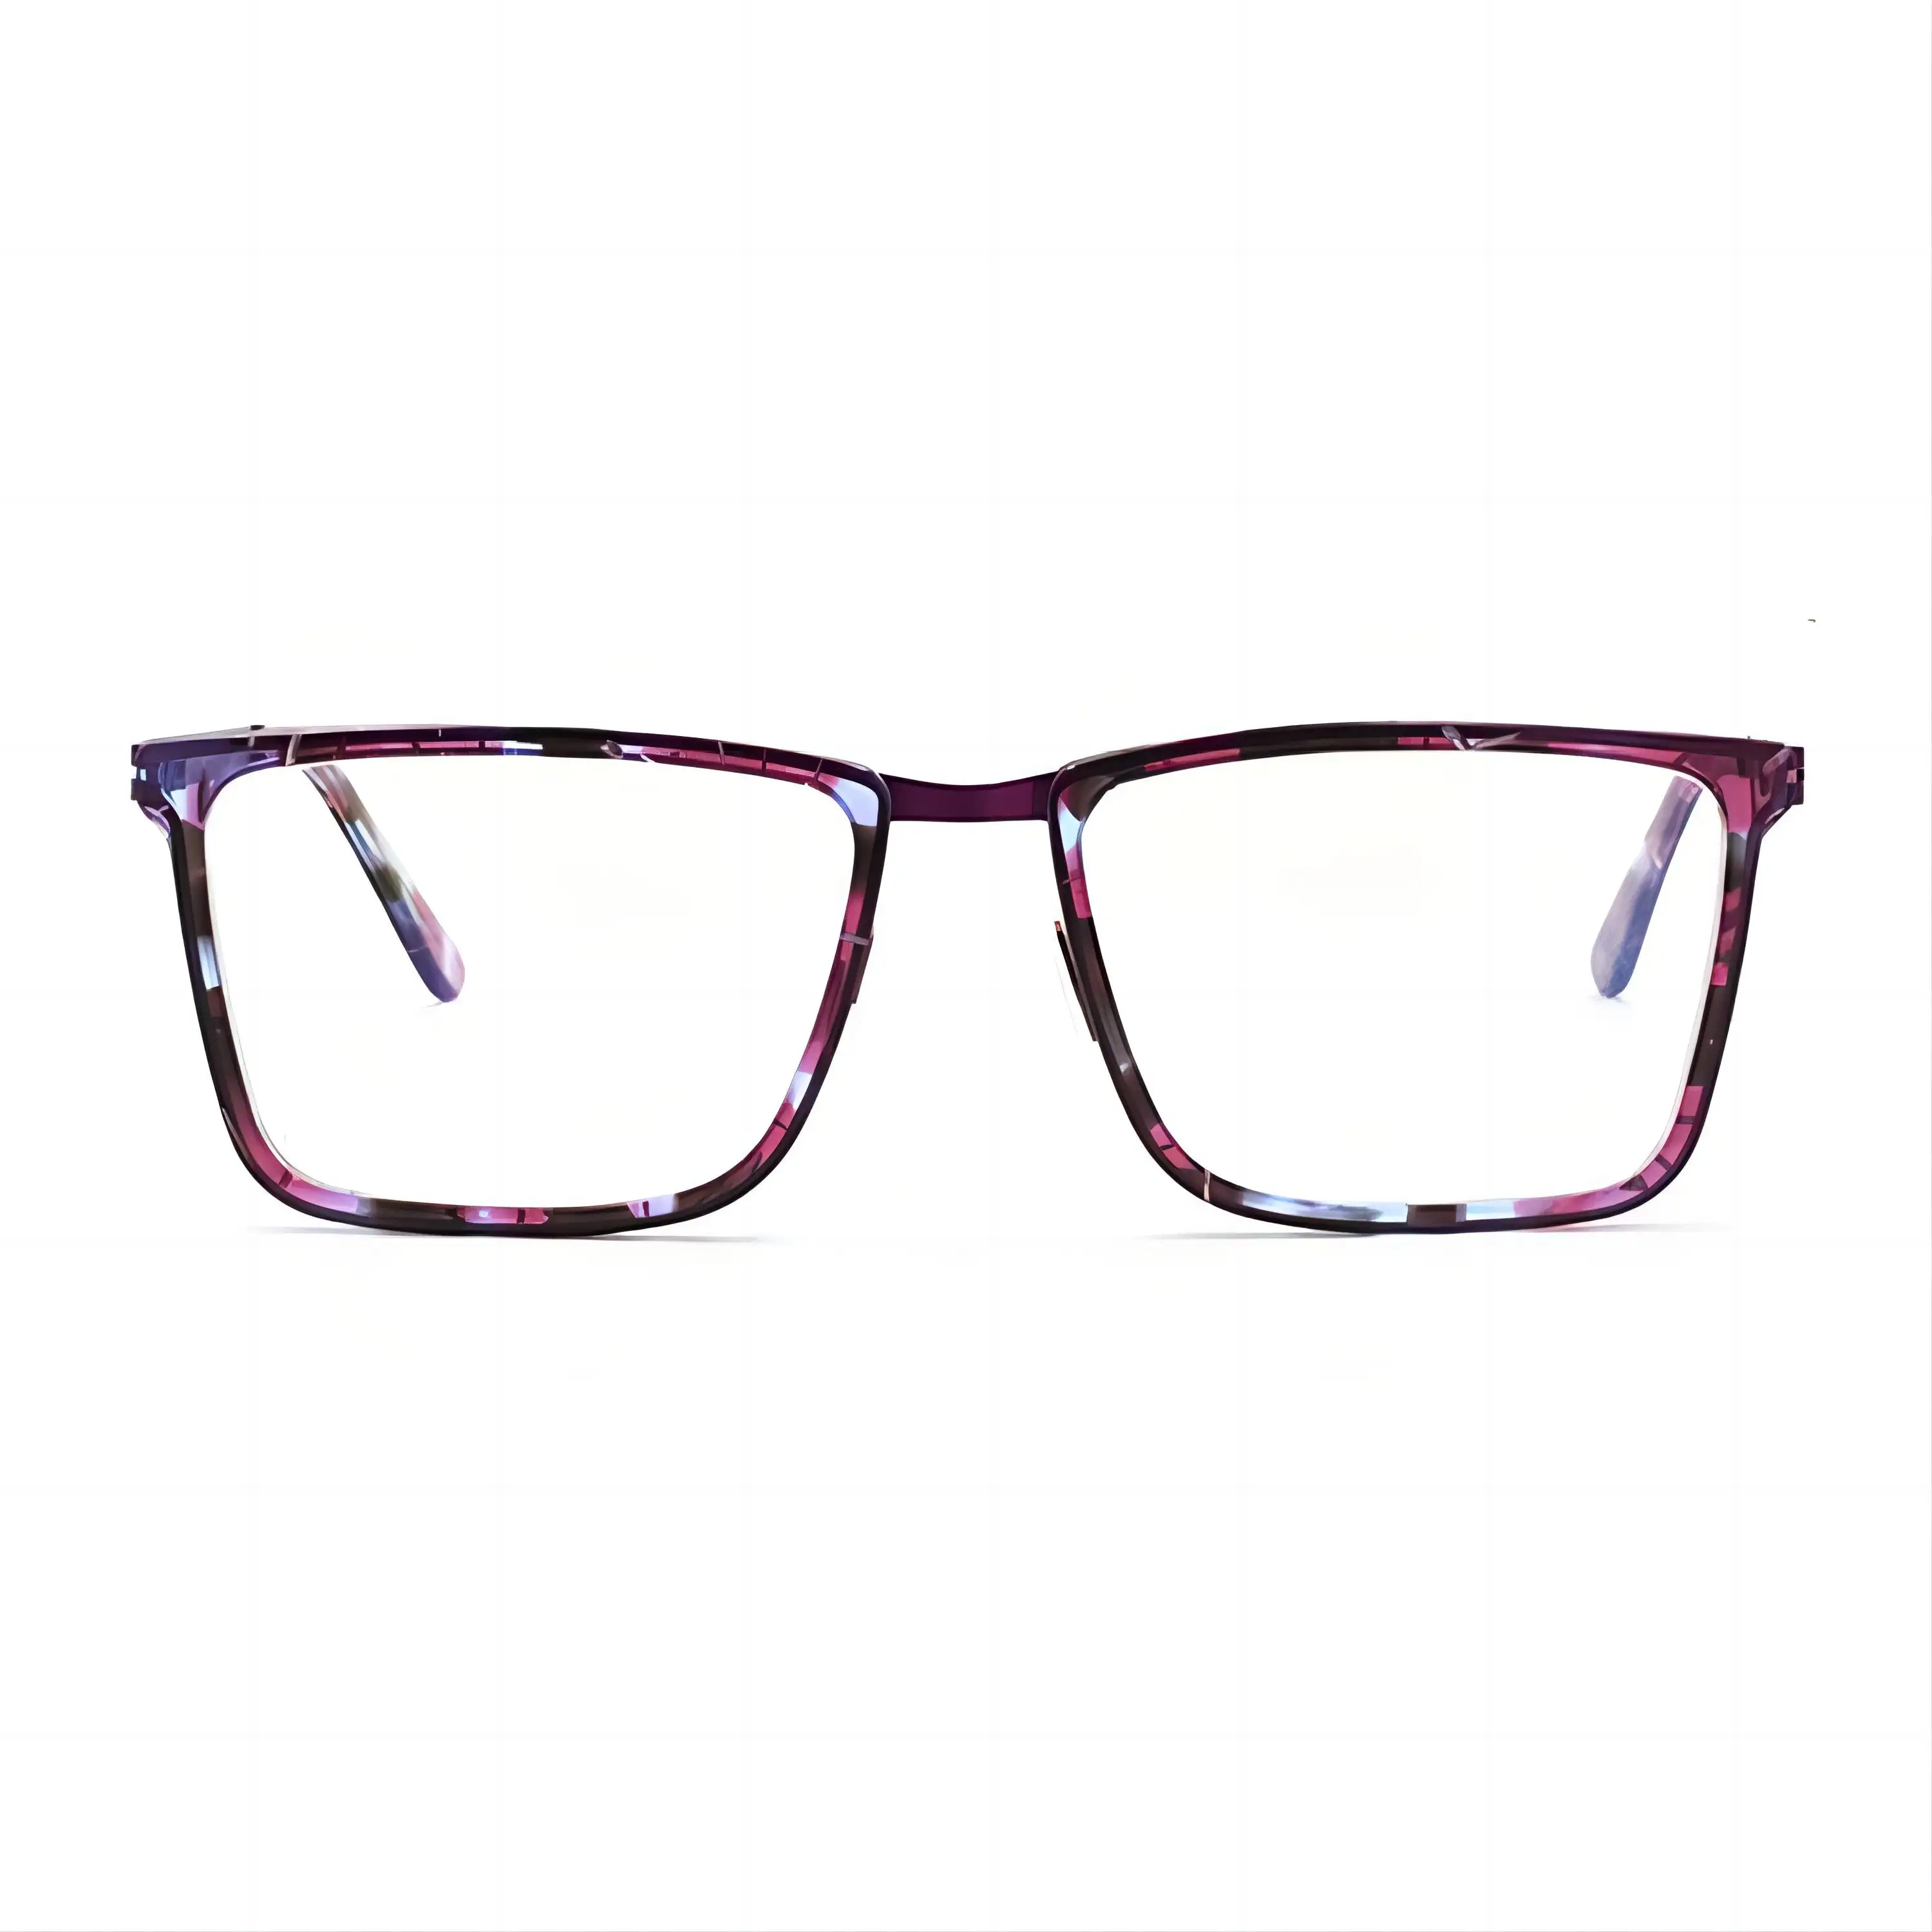 Popular Whole Sales Colorful Rectangle Glasses Acetate with Metal Frame Eyeglasses for Women Men